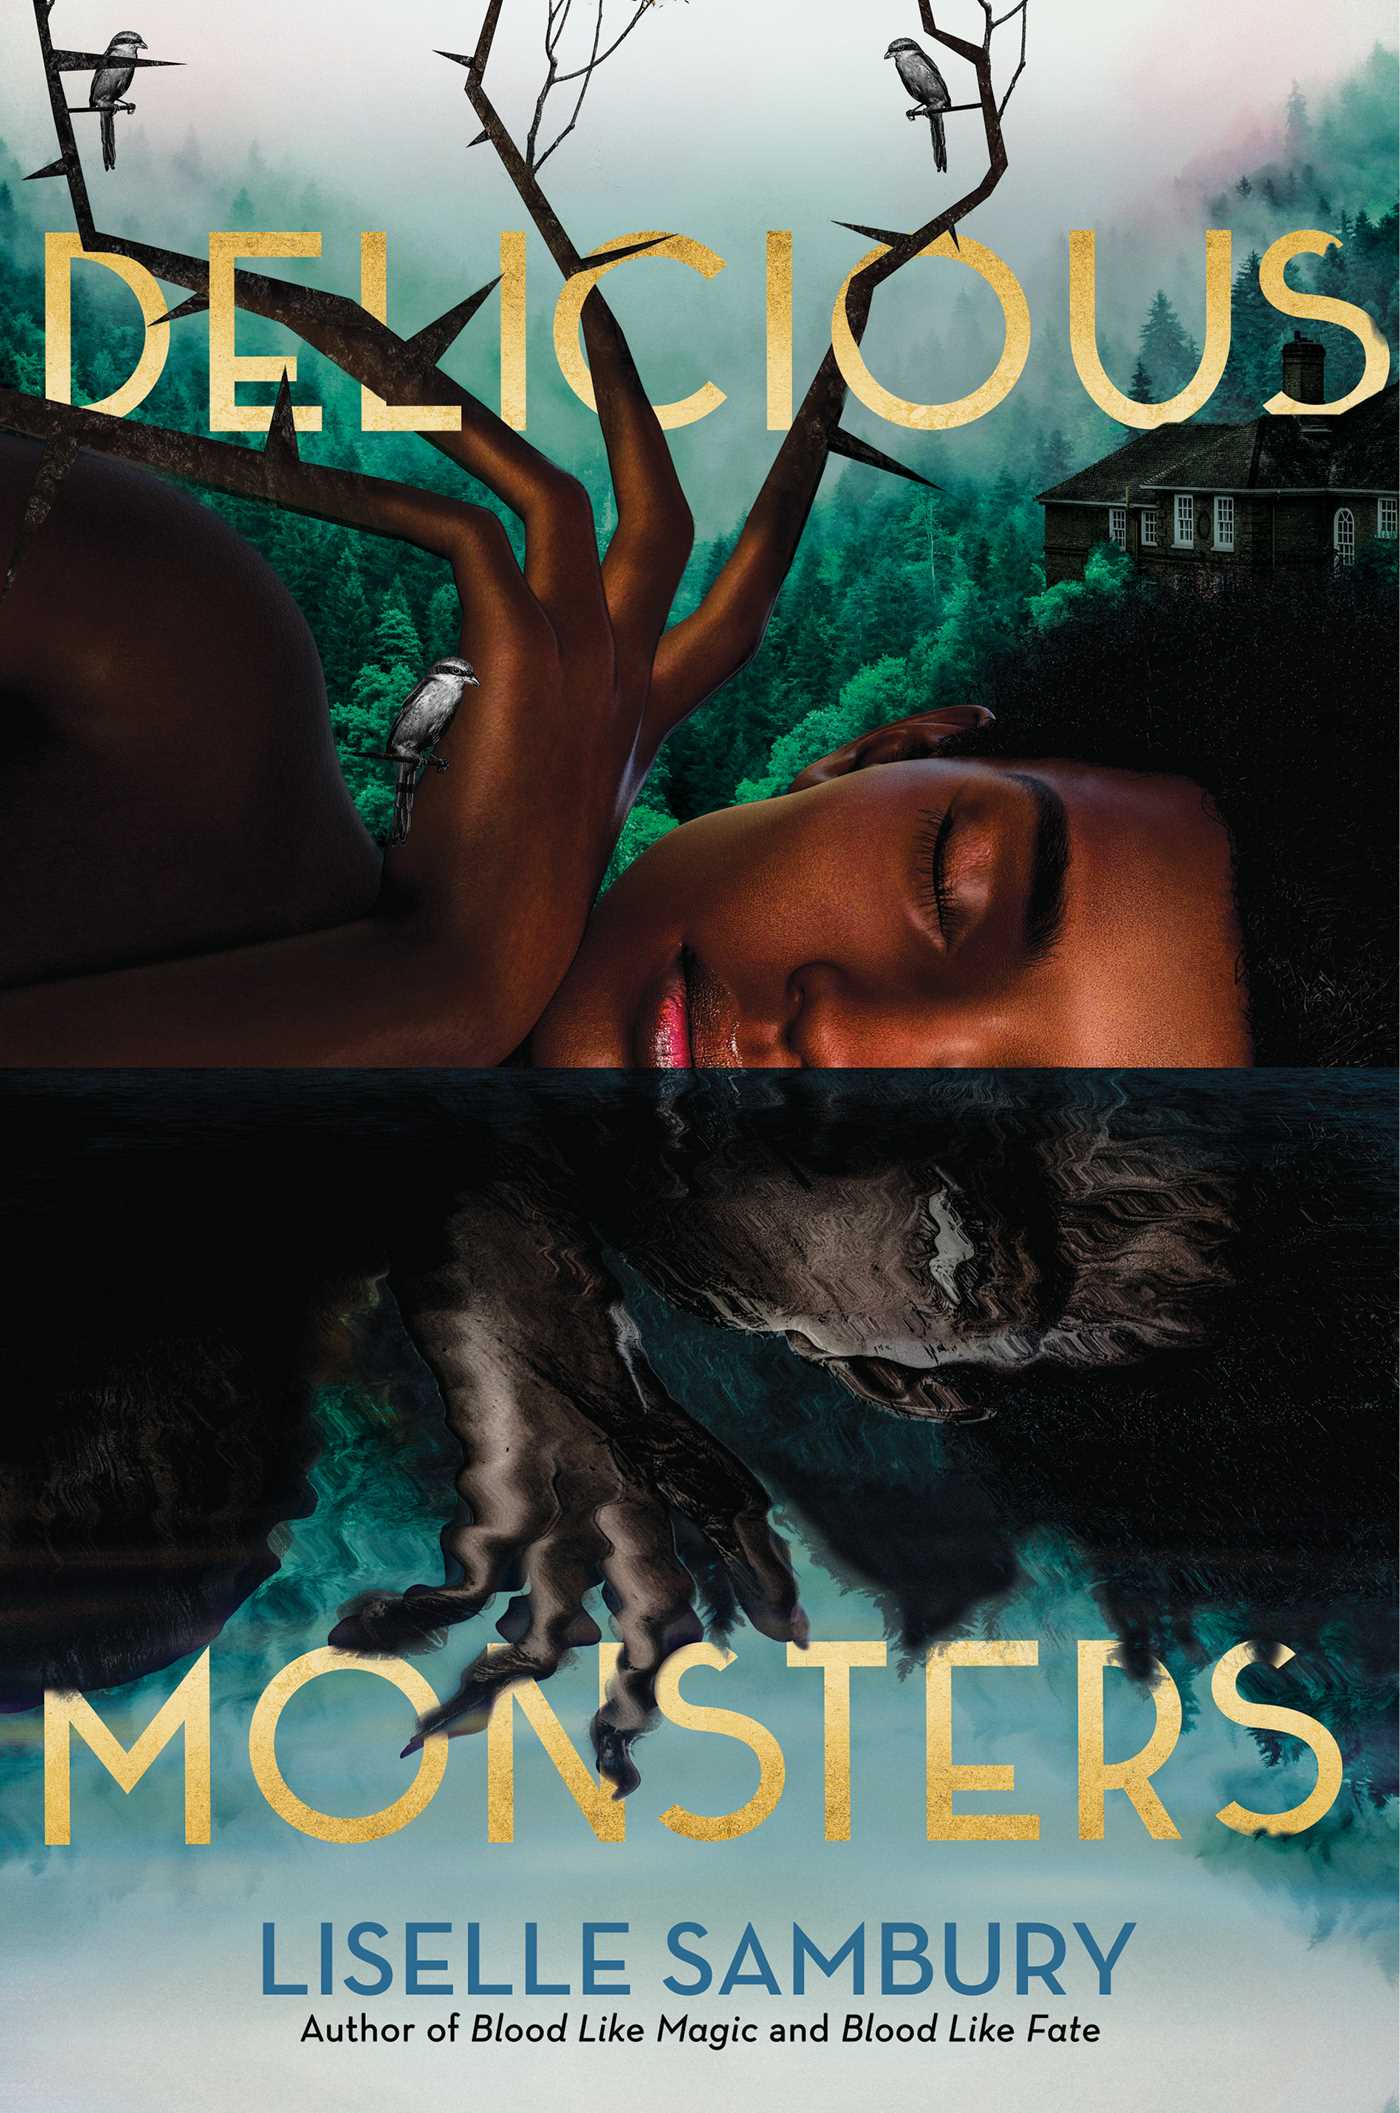 Book Cover for Delicious Monsters by Liselle Sambury